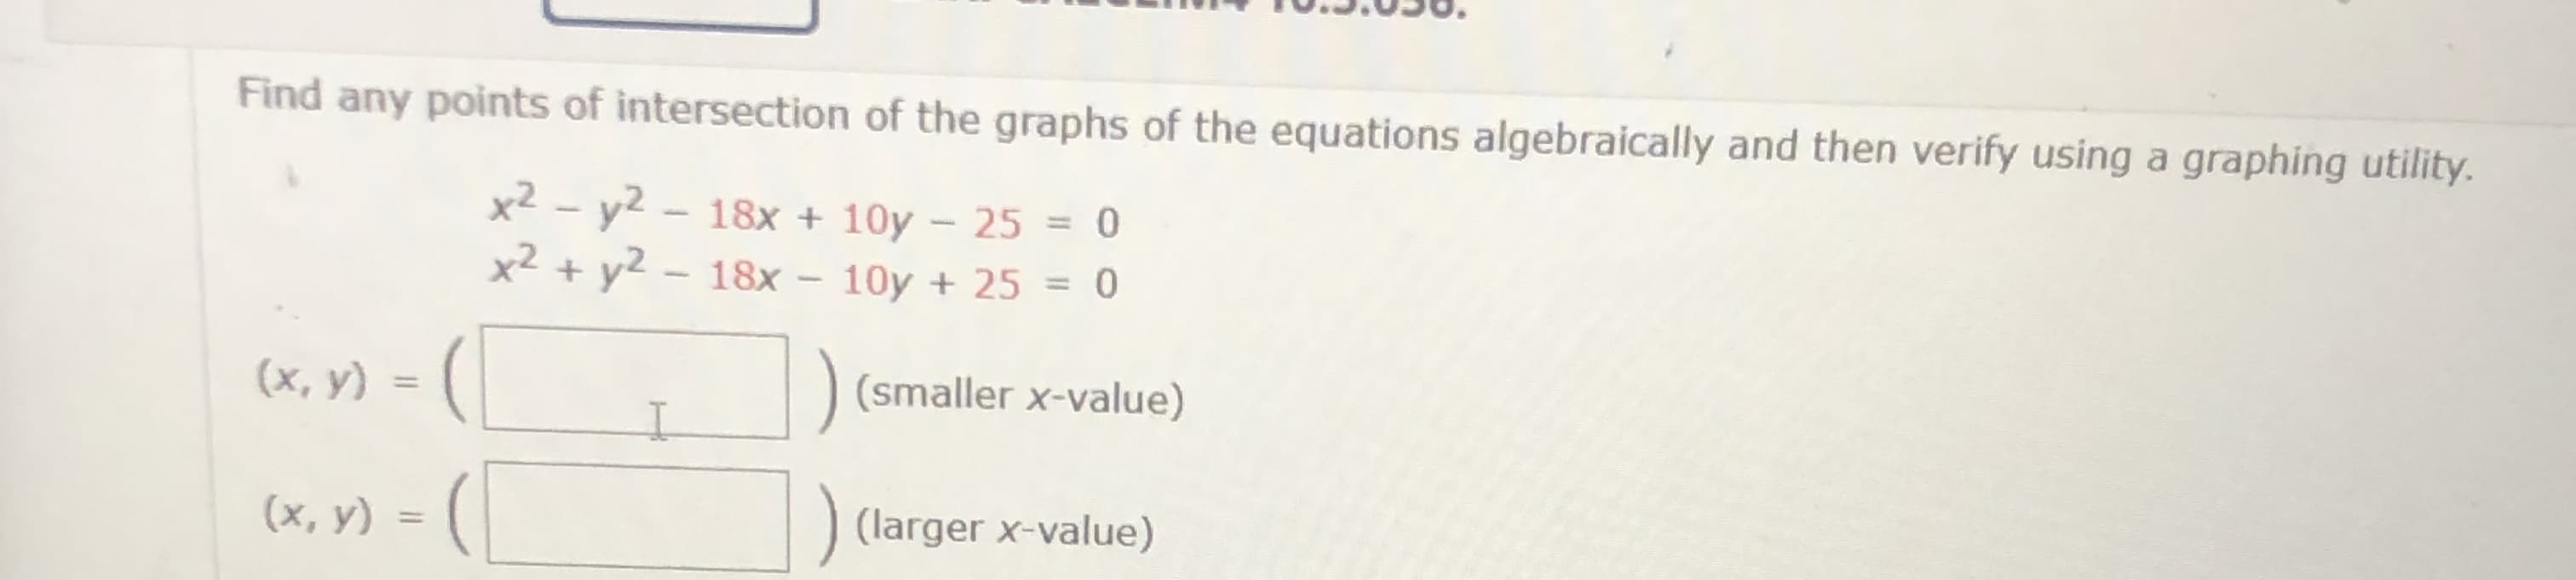 Find any points of intersection of the graphs of the equations algebraically and then verify using a graphing utility.
x2 - y2 – 18x + 10y – 25 = 0
x² + y2 – 18x – 10y + 25 = 0
%3D
%3D
